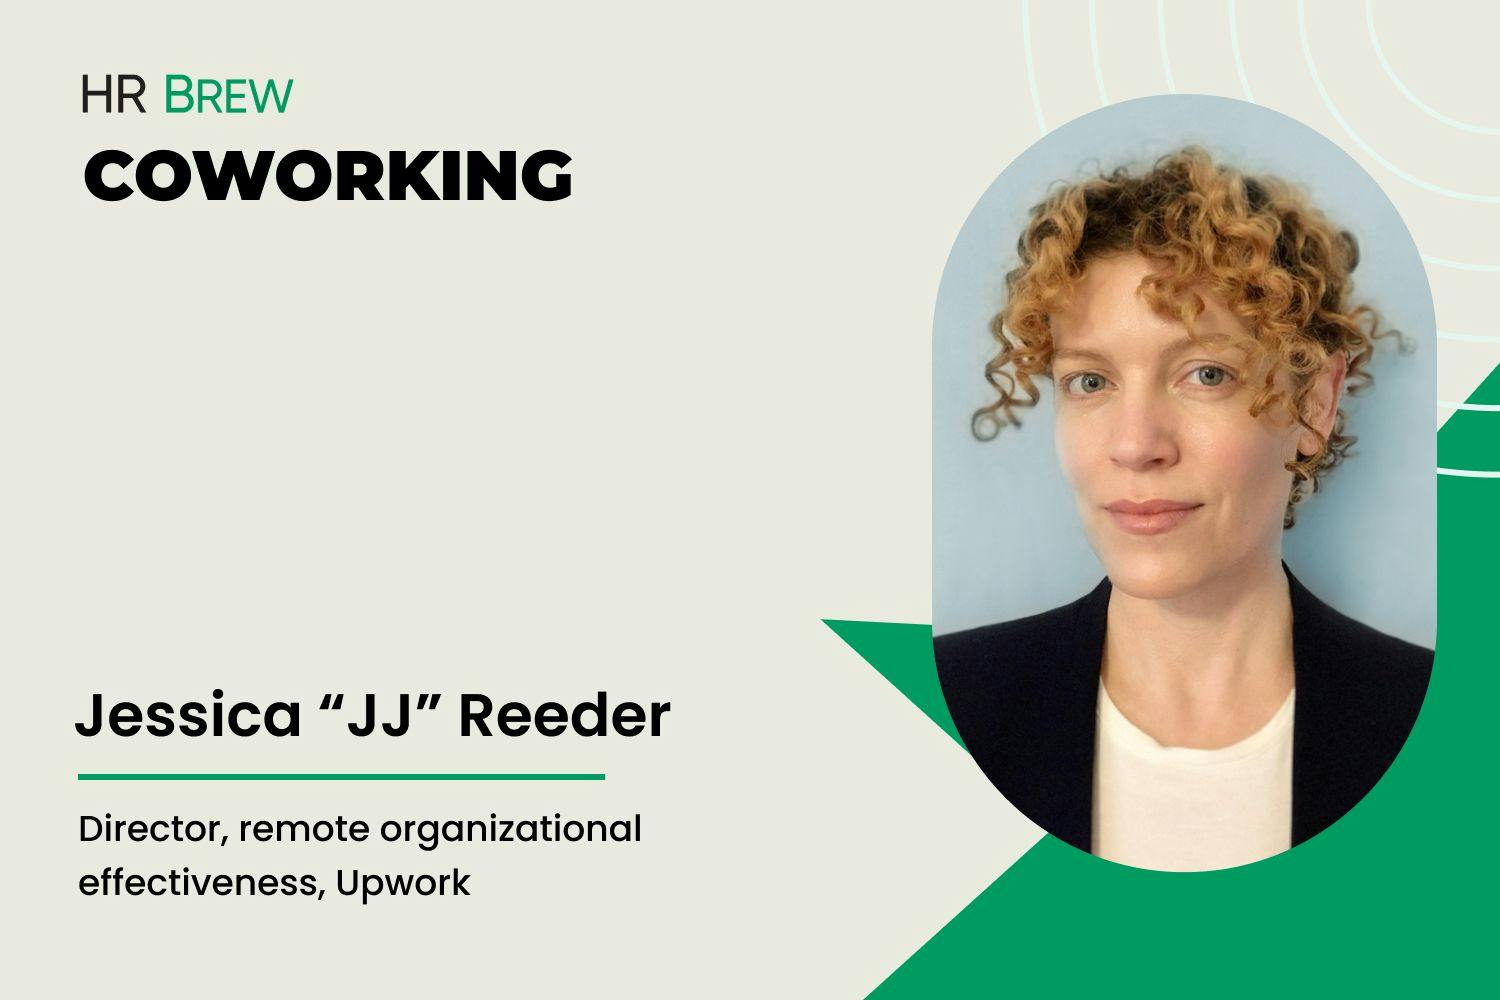 image of headshot of woman next to the words HR Brew, Coworking, Jessice JJ Reed, director of remote organizational effectiveness, Upwork 